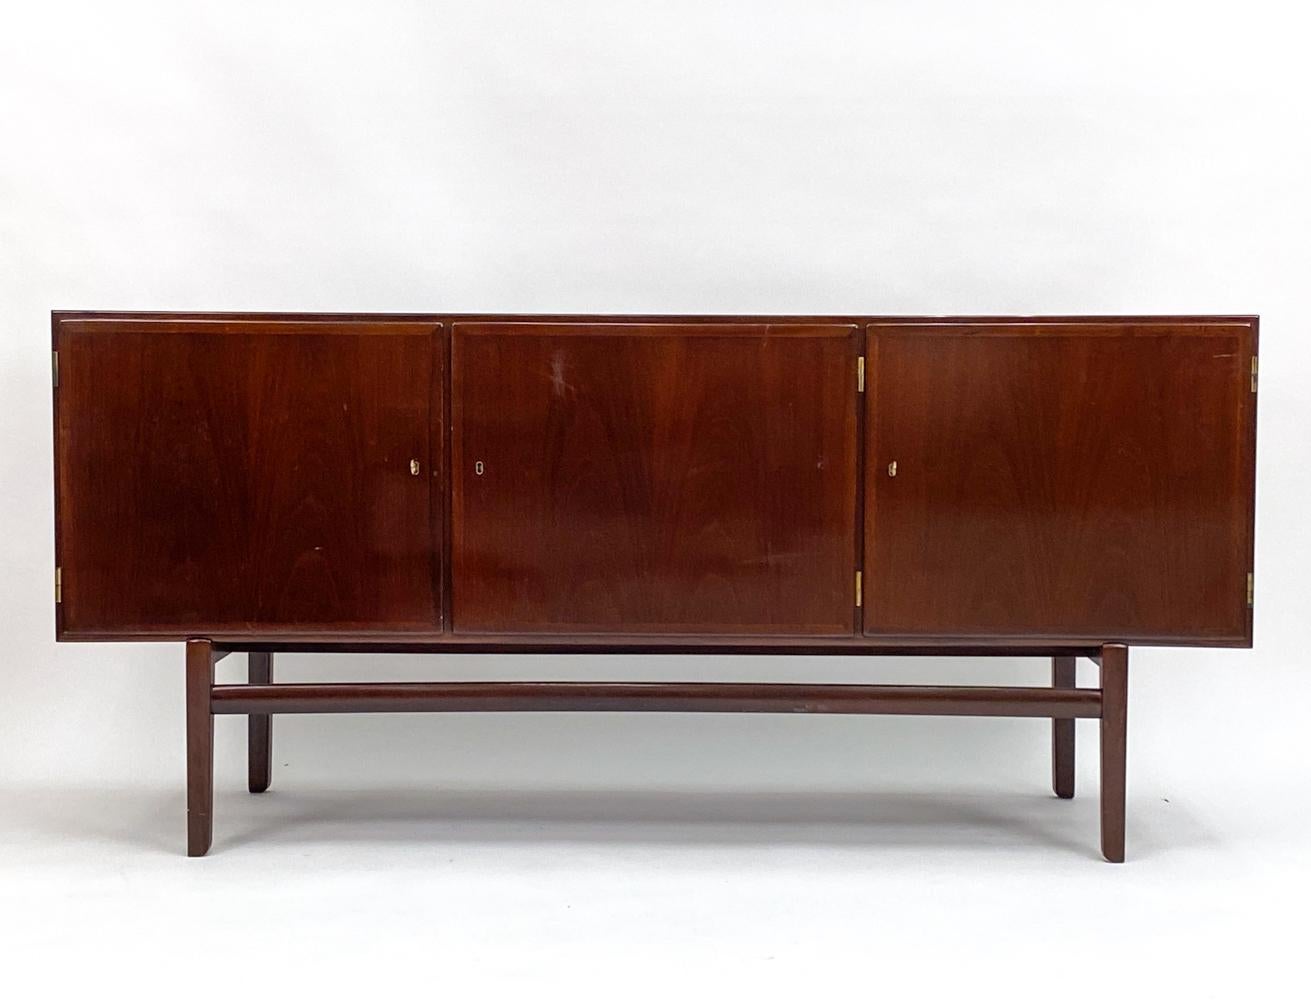 Danish Ole Wanscher for Poul Jeppesen Rungstedlund Series Sideboard in Mahogany For Sale